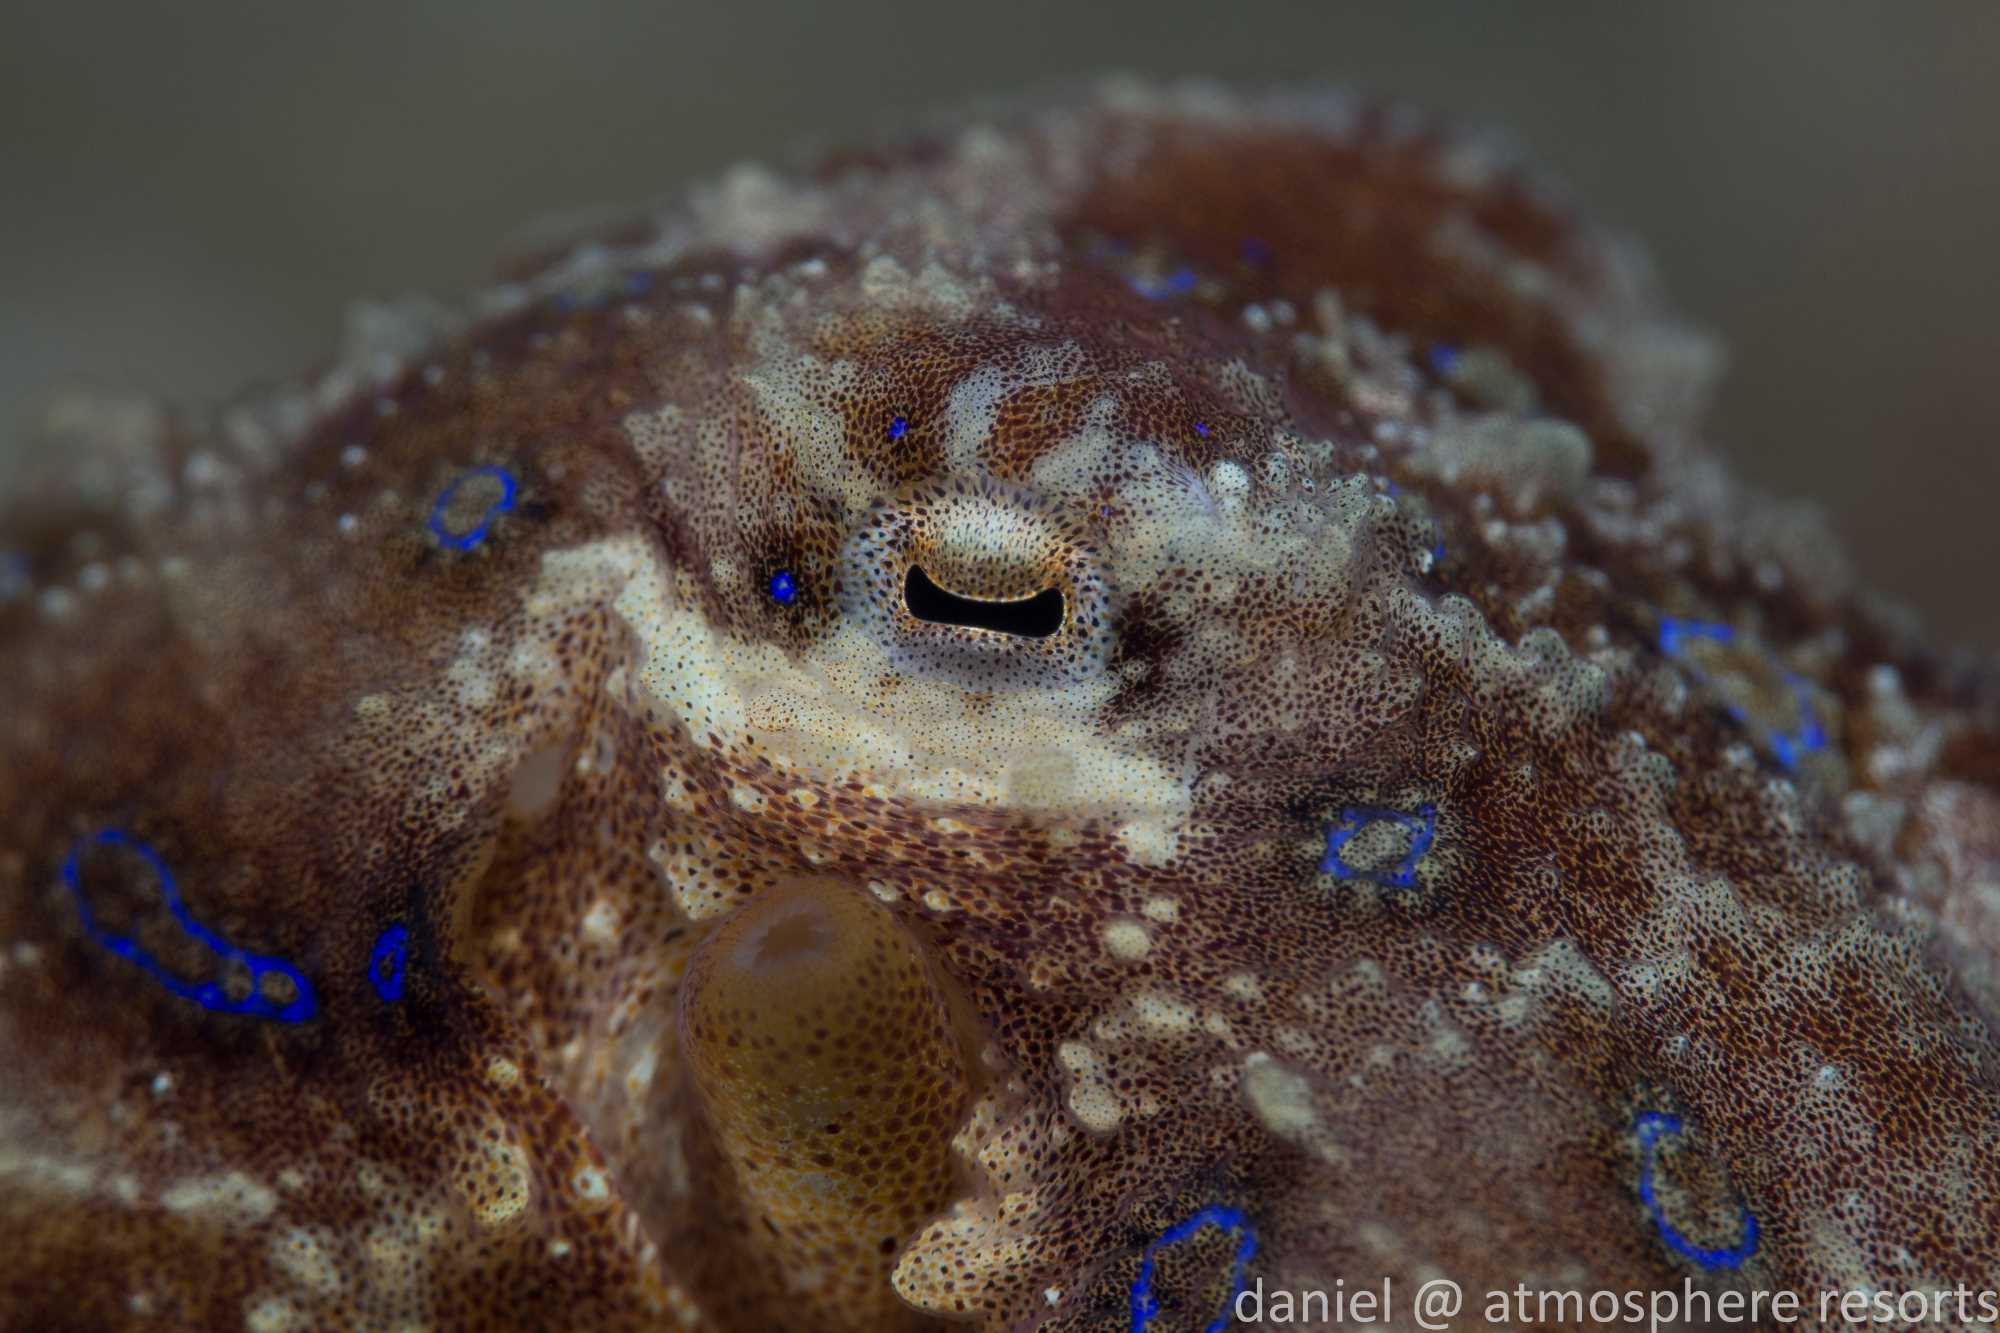 A close up picture of the eye of a blue-ringed octopus